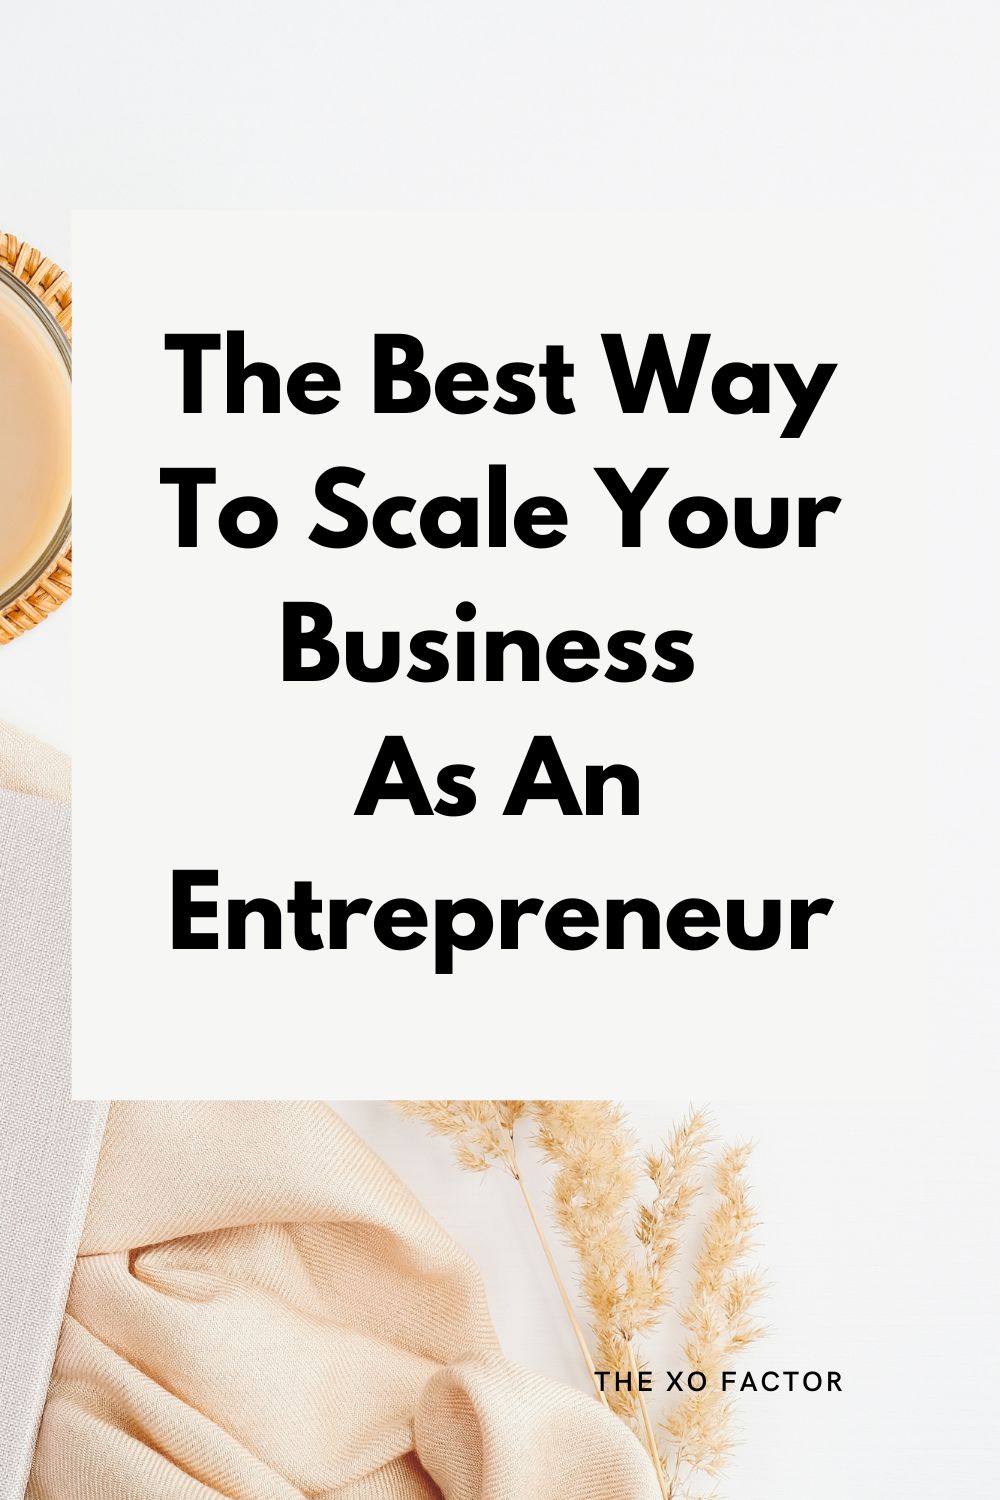 The Best Way To Scale Your Business As An Entrepreneur